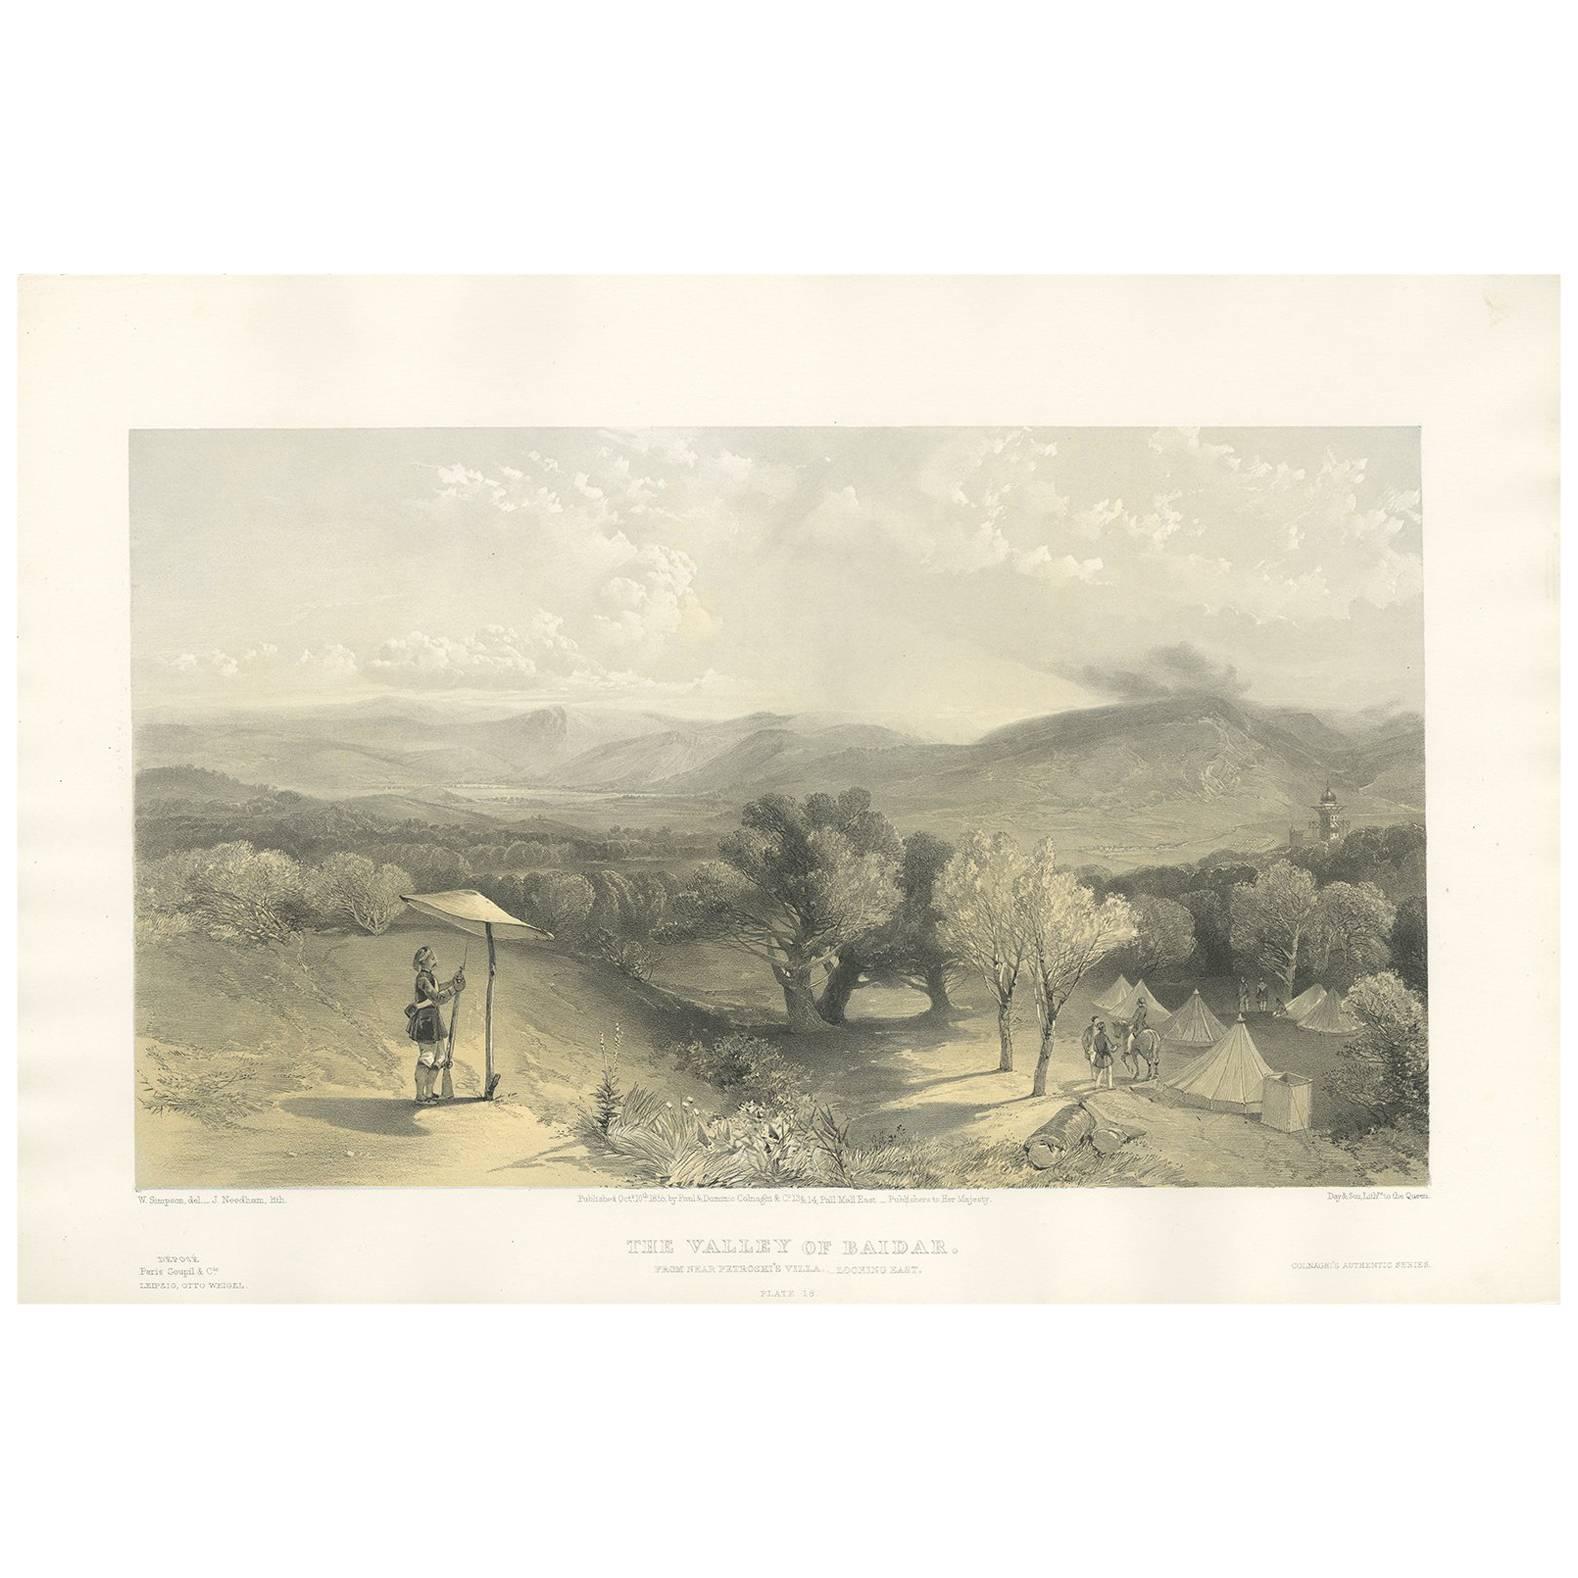 Antique Print of the Valley of Baidar ‘Crimean War’ by W. Simpson, 1855